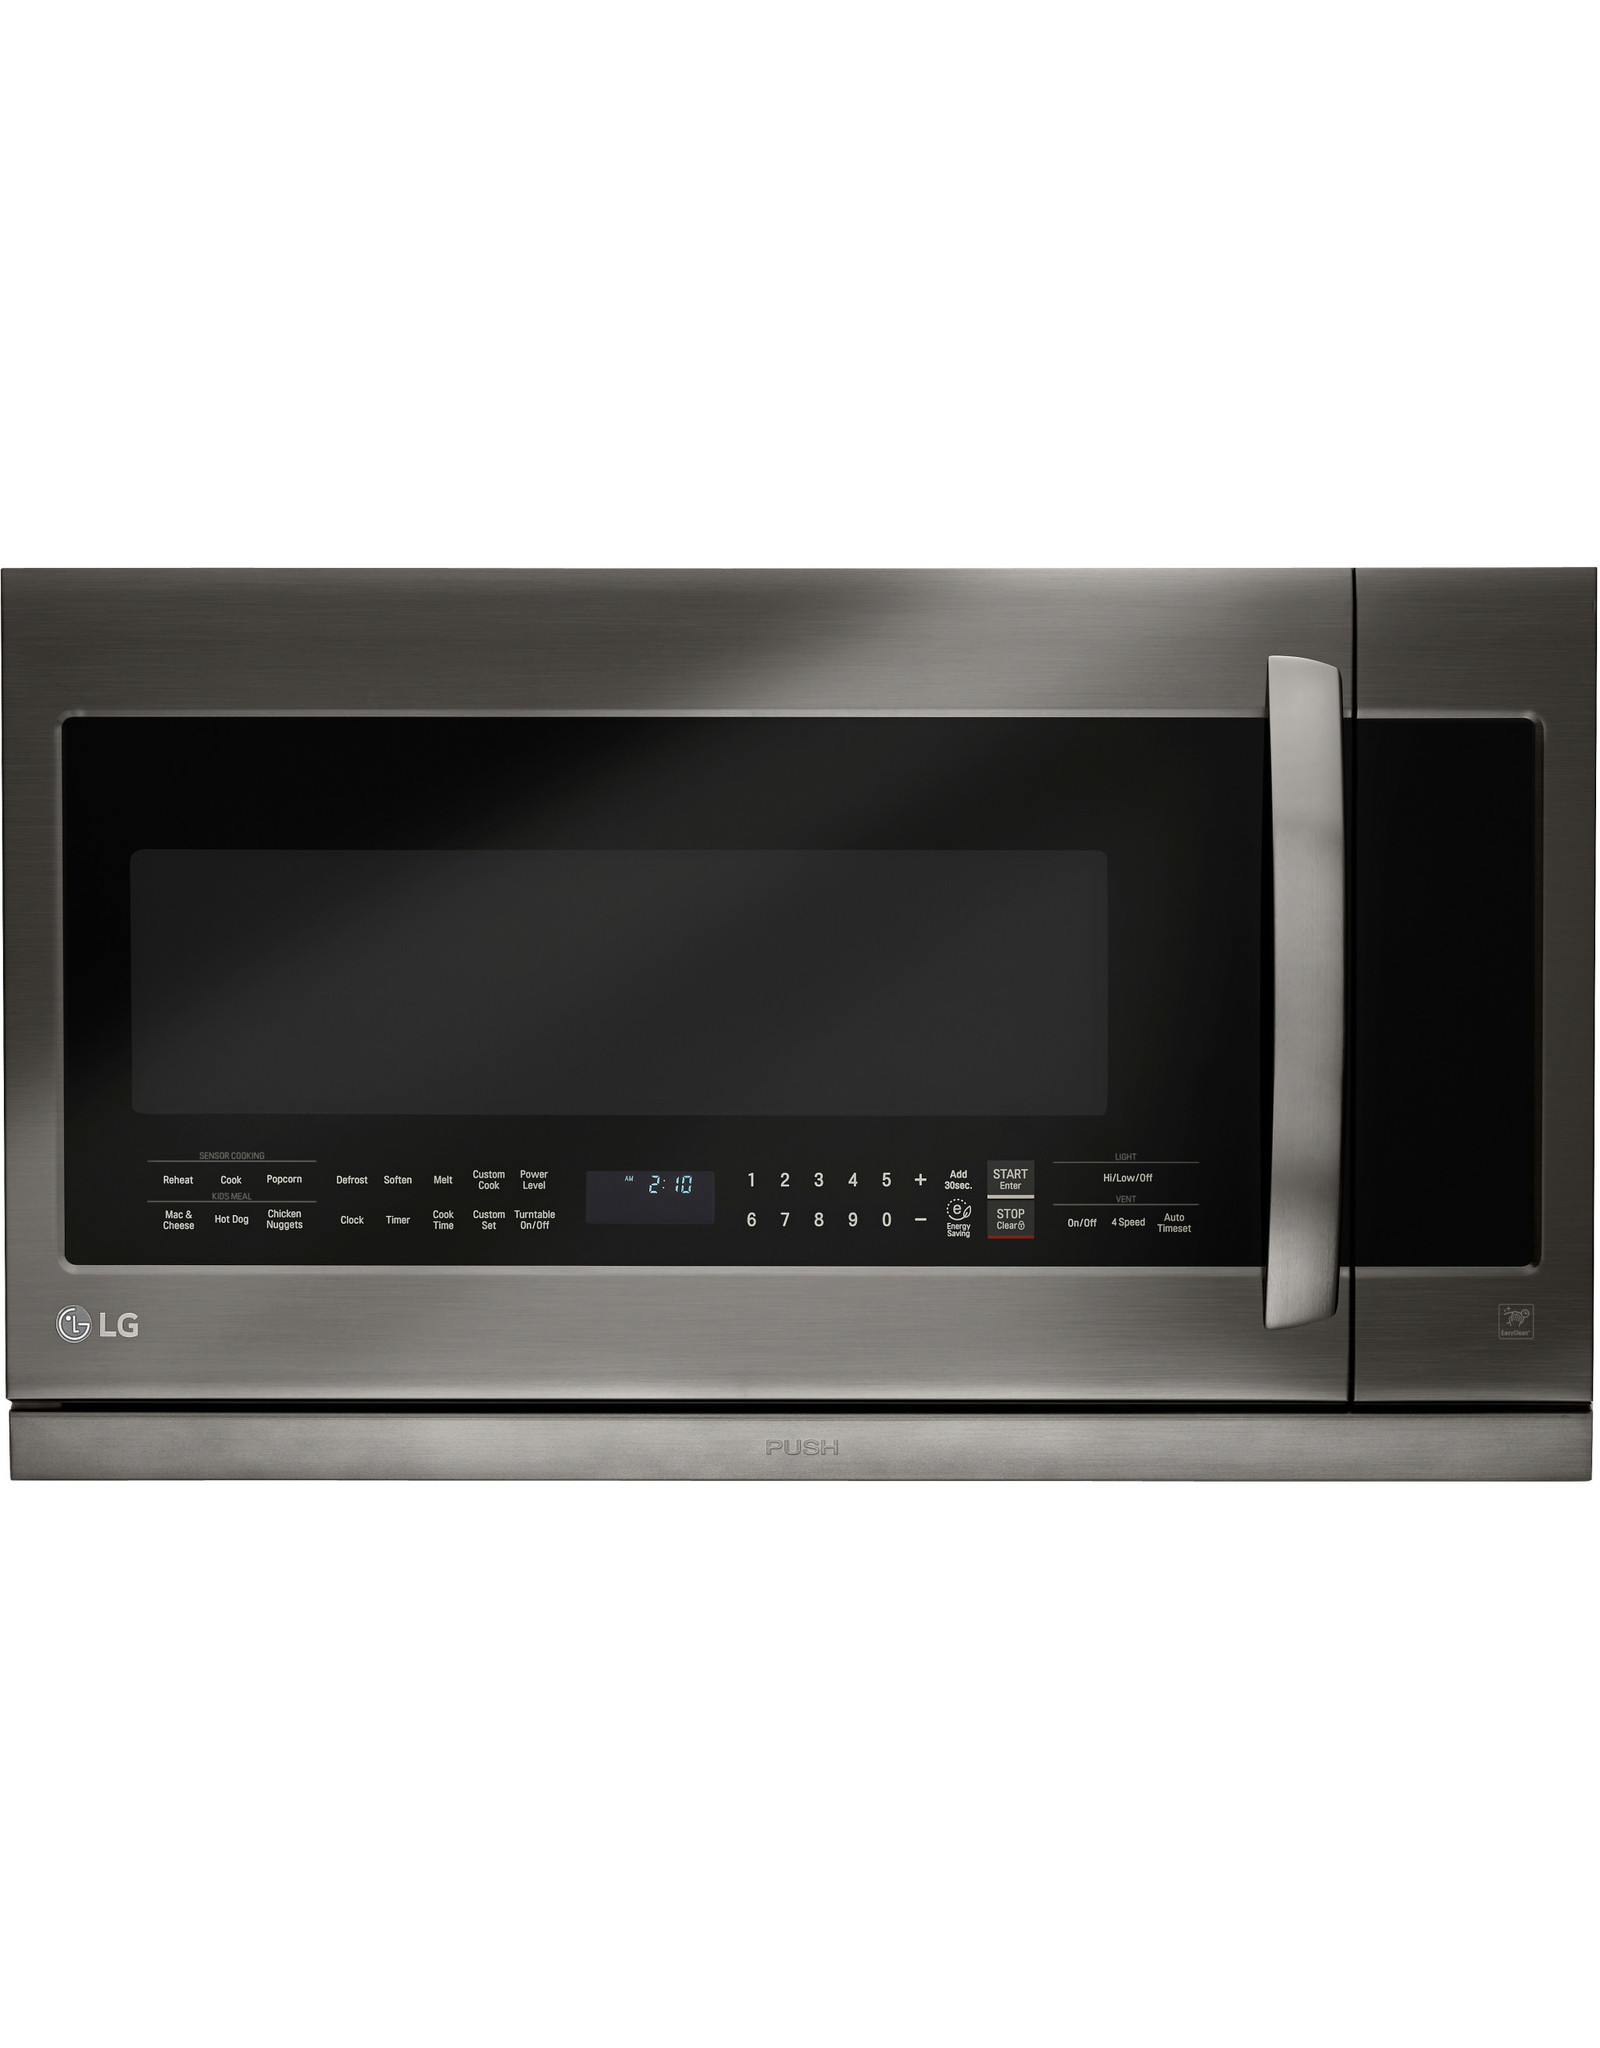 LG Electronics LMHM2237BD 2.2 cu. ft. Over the Range Microwave in Black Stainless Steel with Sensor Cook and ExtendaVent